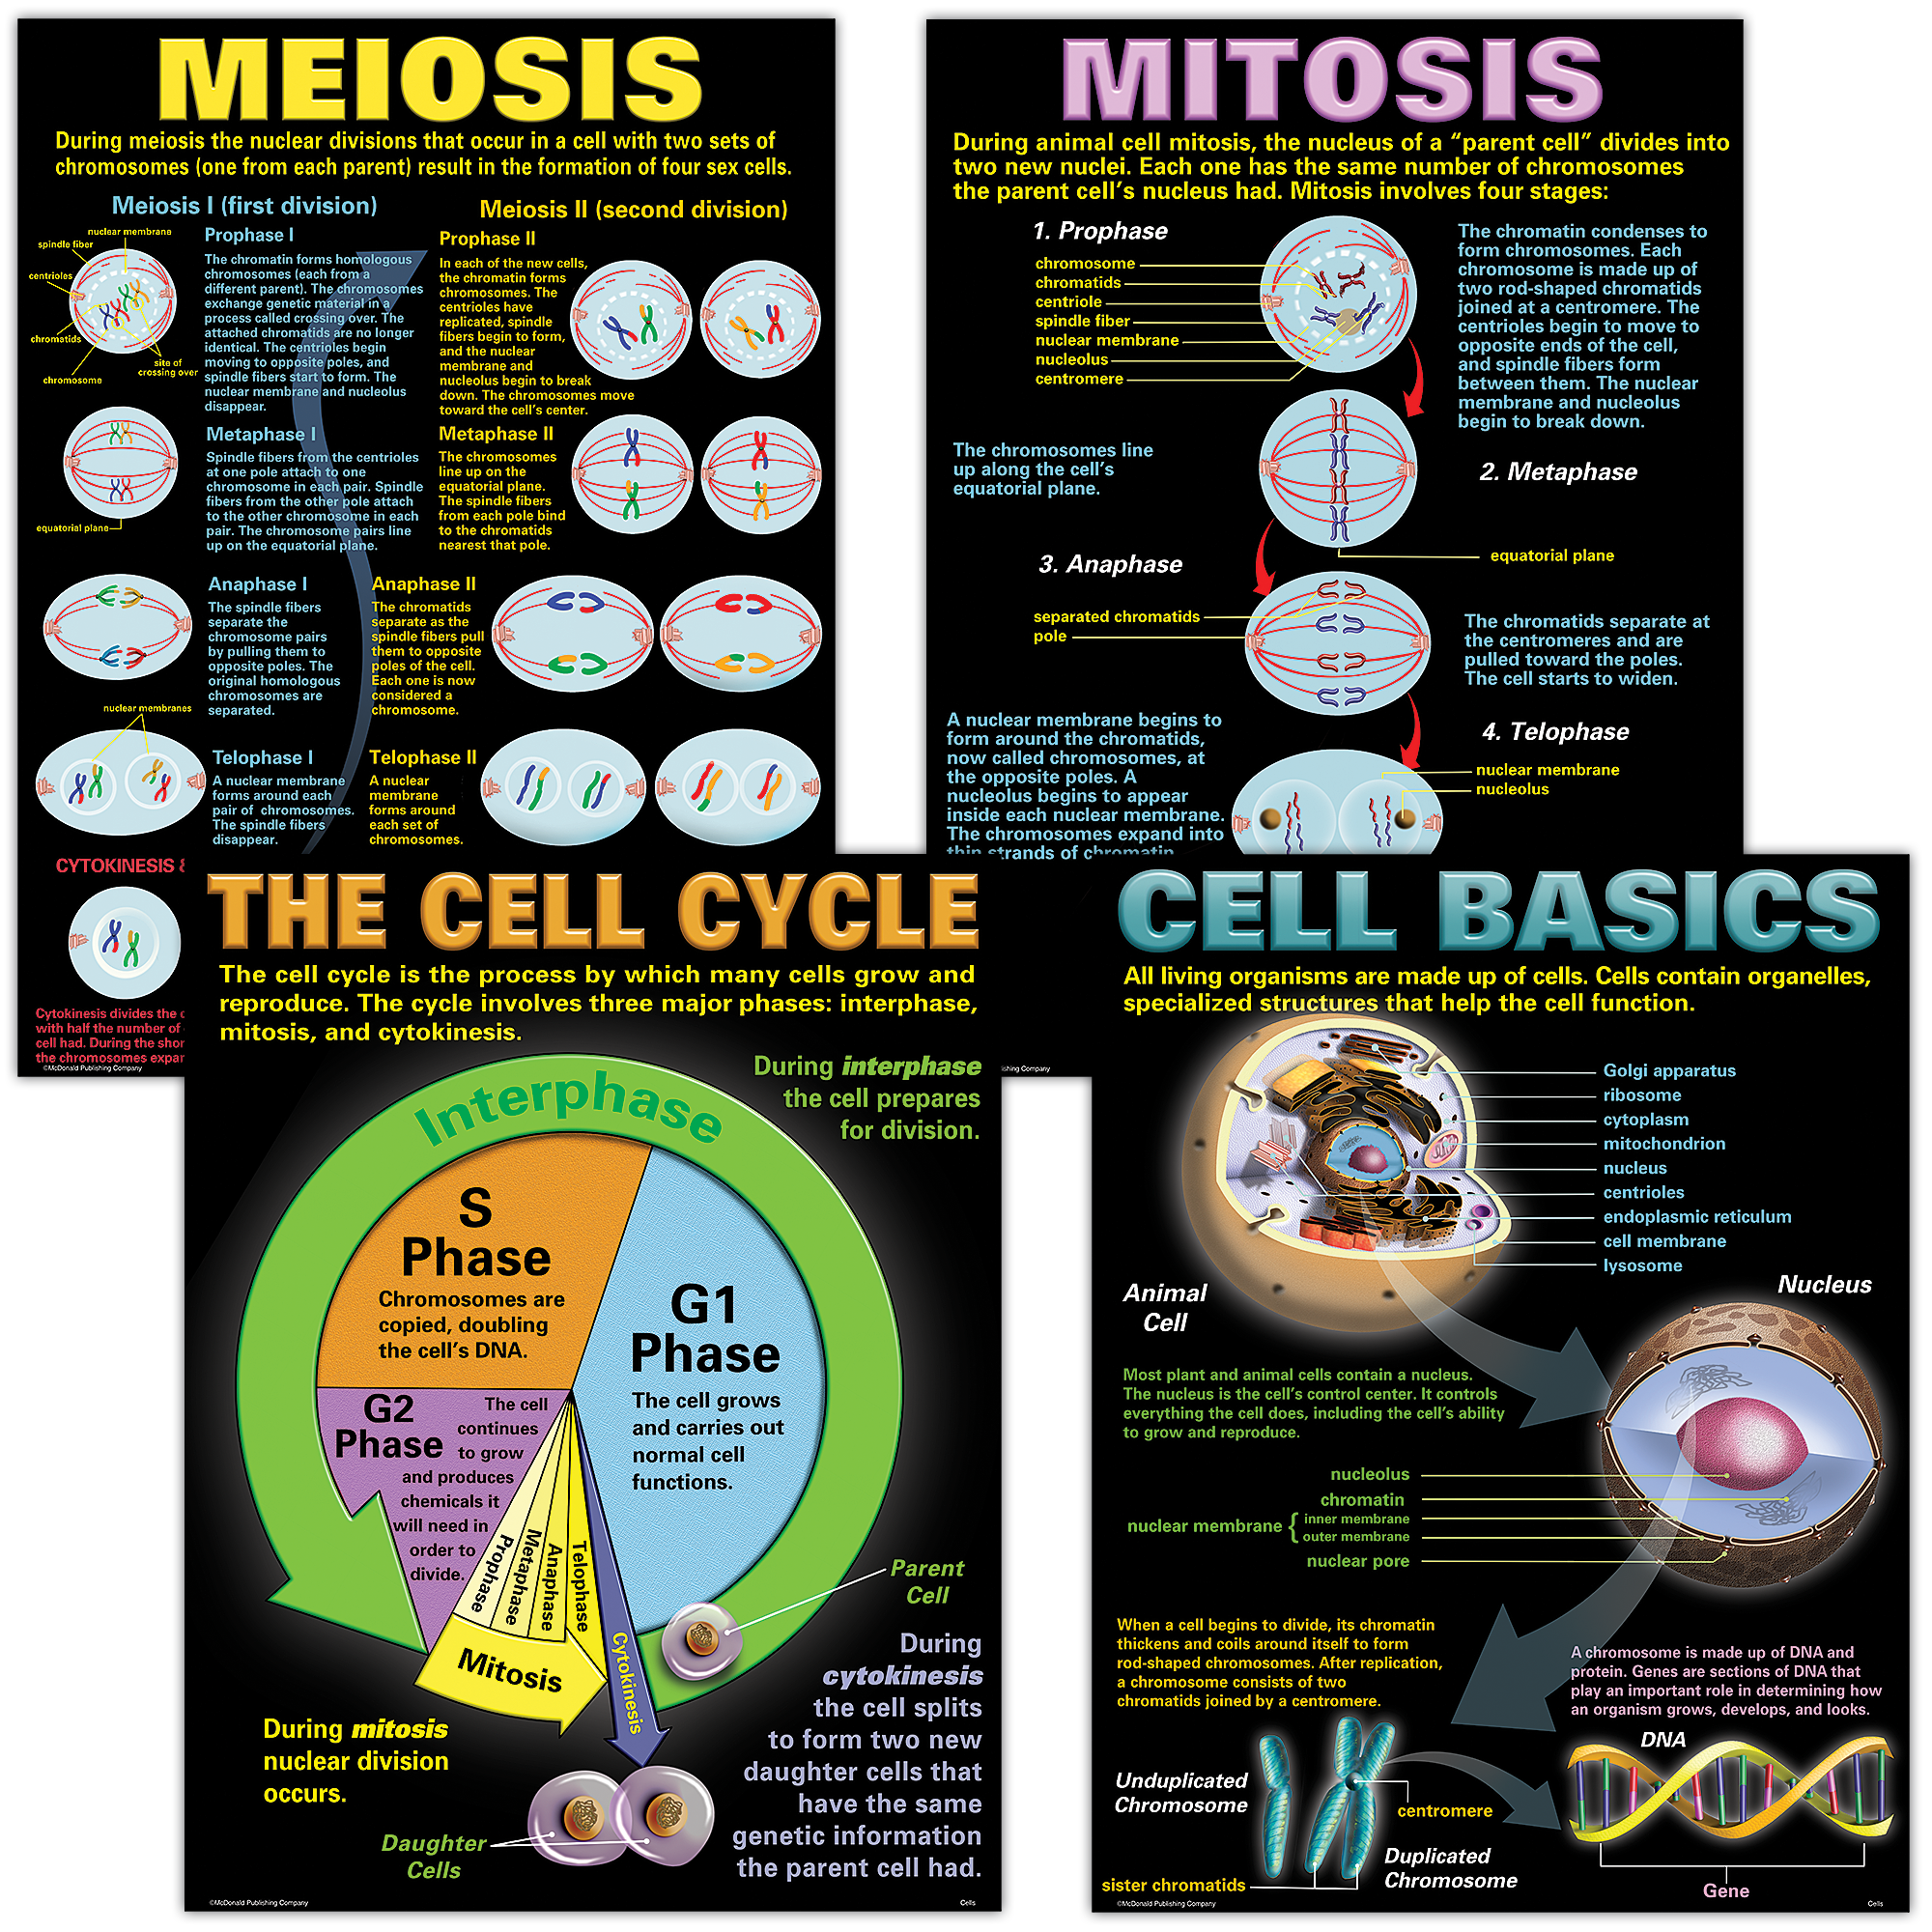 Help students learn about the “building blocks” of life with these posters that teach the main parts of a cell and the phases of the cell cycle. The posters also clearly describe and illustrate the stages of mitosis and meiosis. The set contains four 17" x 22" posters, four reproducible activity sheets, and a teacher’s guide.